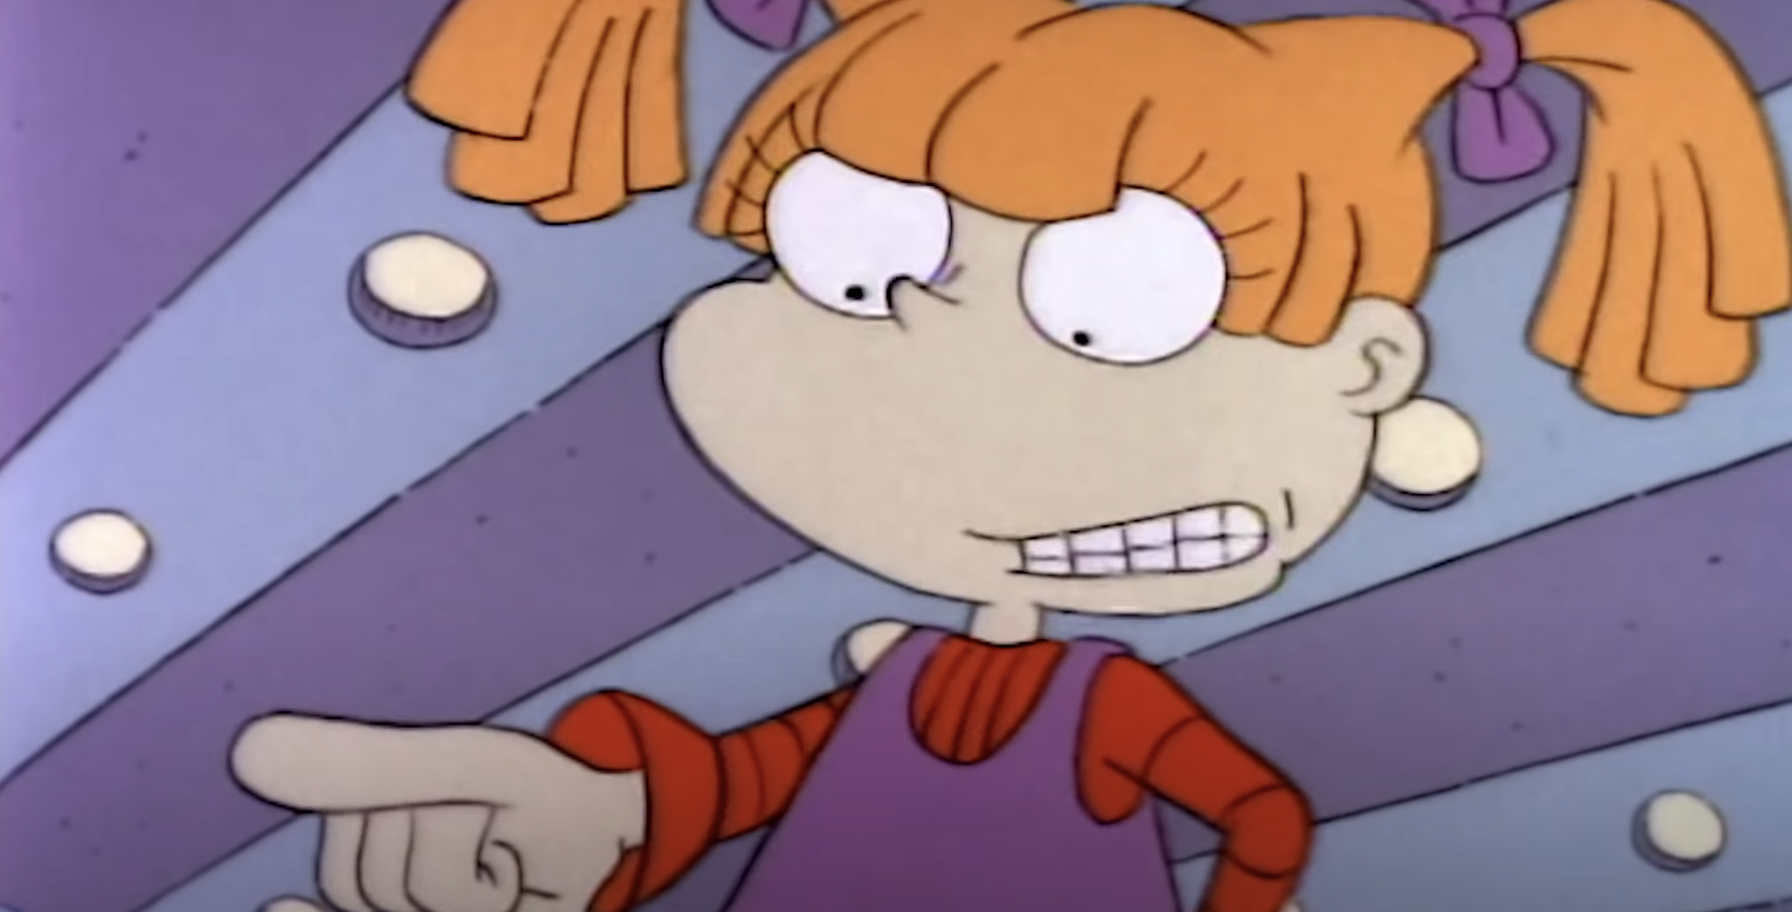 Angelica pointing her finger and looking mean